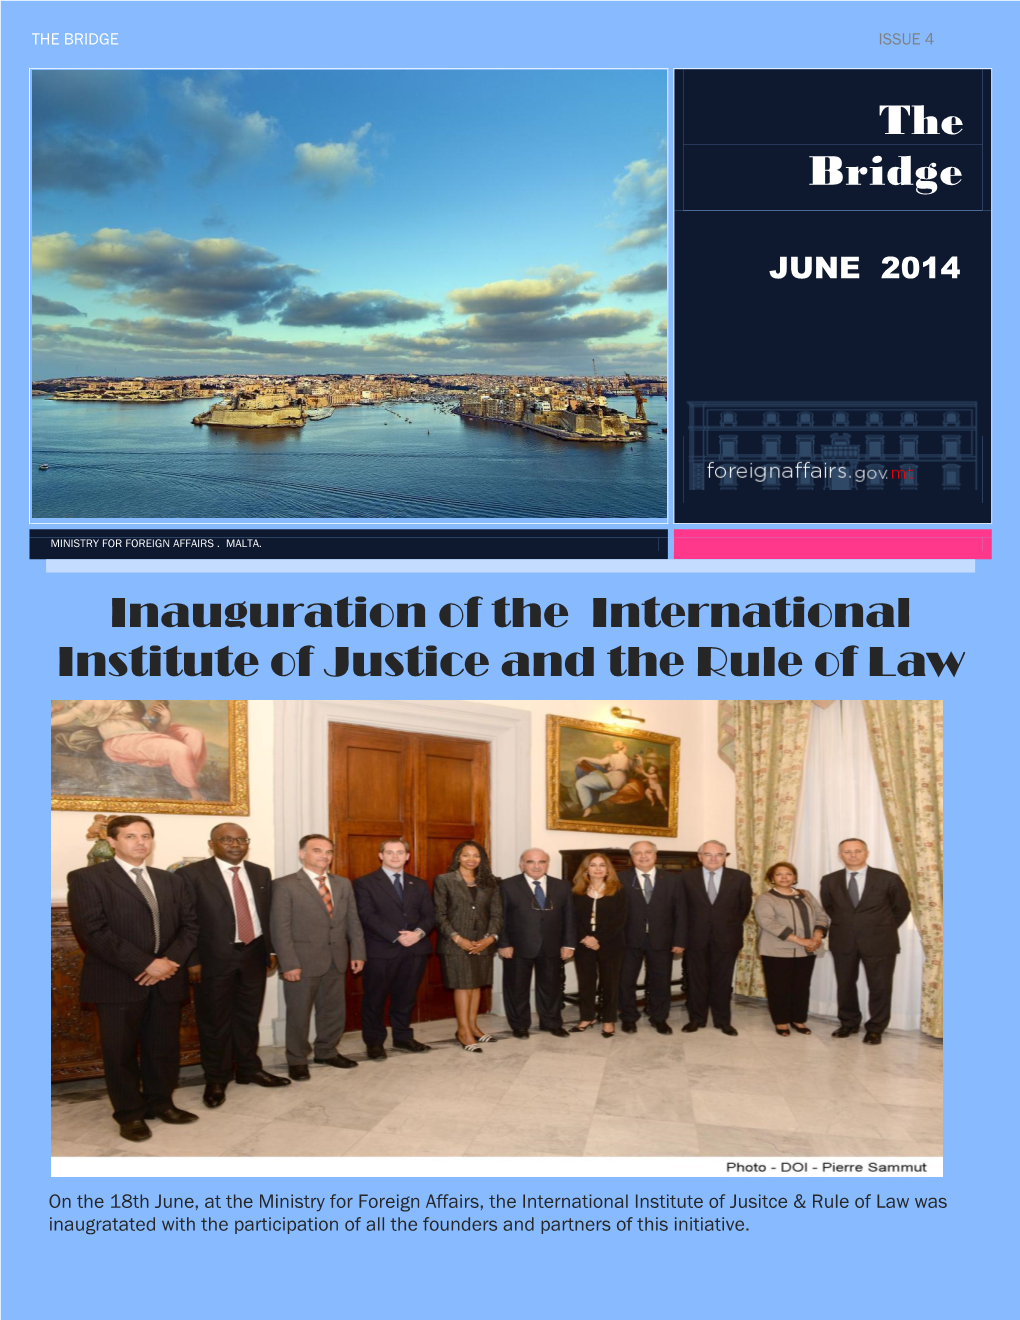 The Bridge Inauguration of the International Institute of Justice and the Rule Of